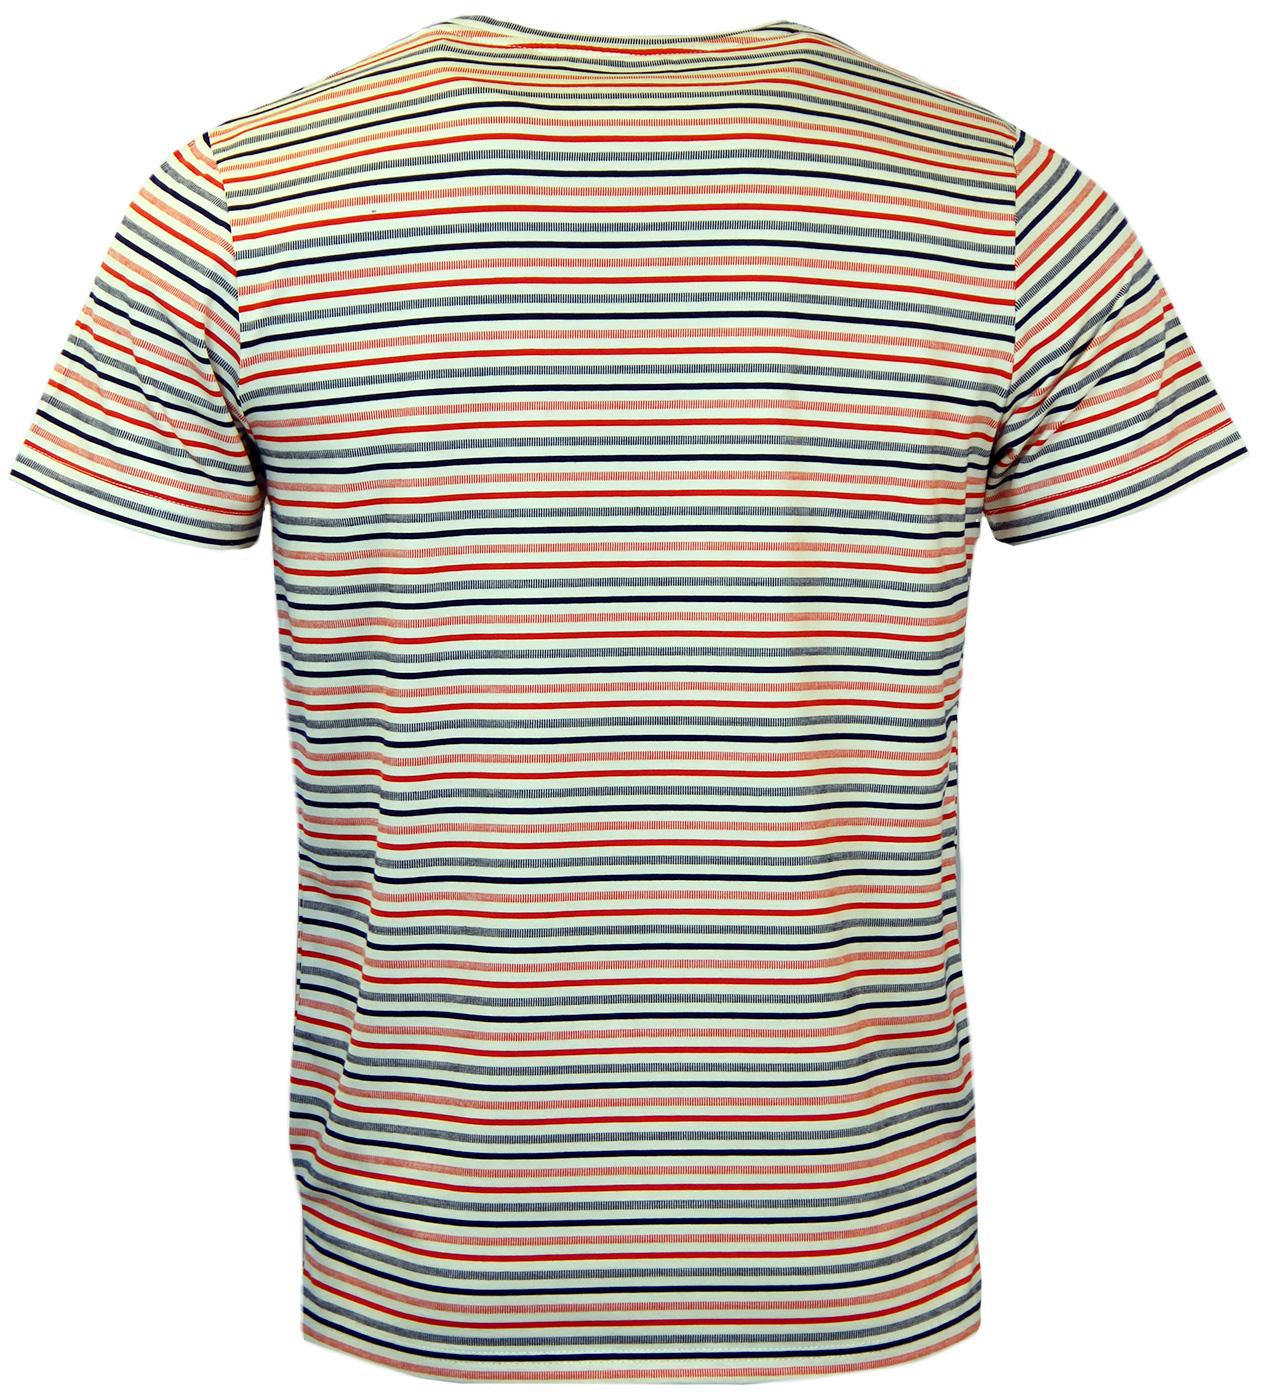 NATIVE YOUTH Retro Mod 60s Geo Stripe T-Shirt in Red